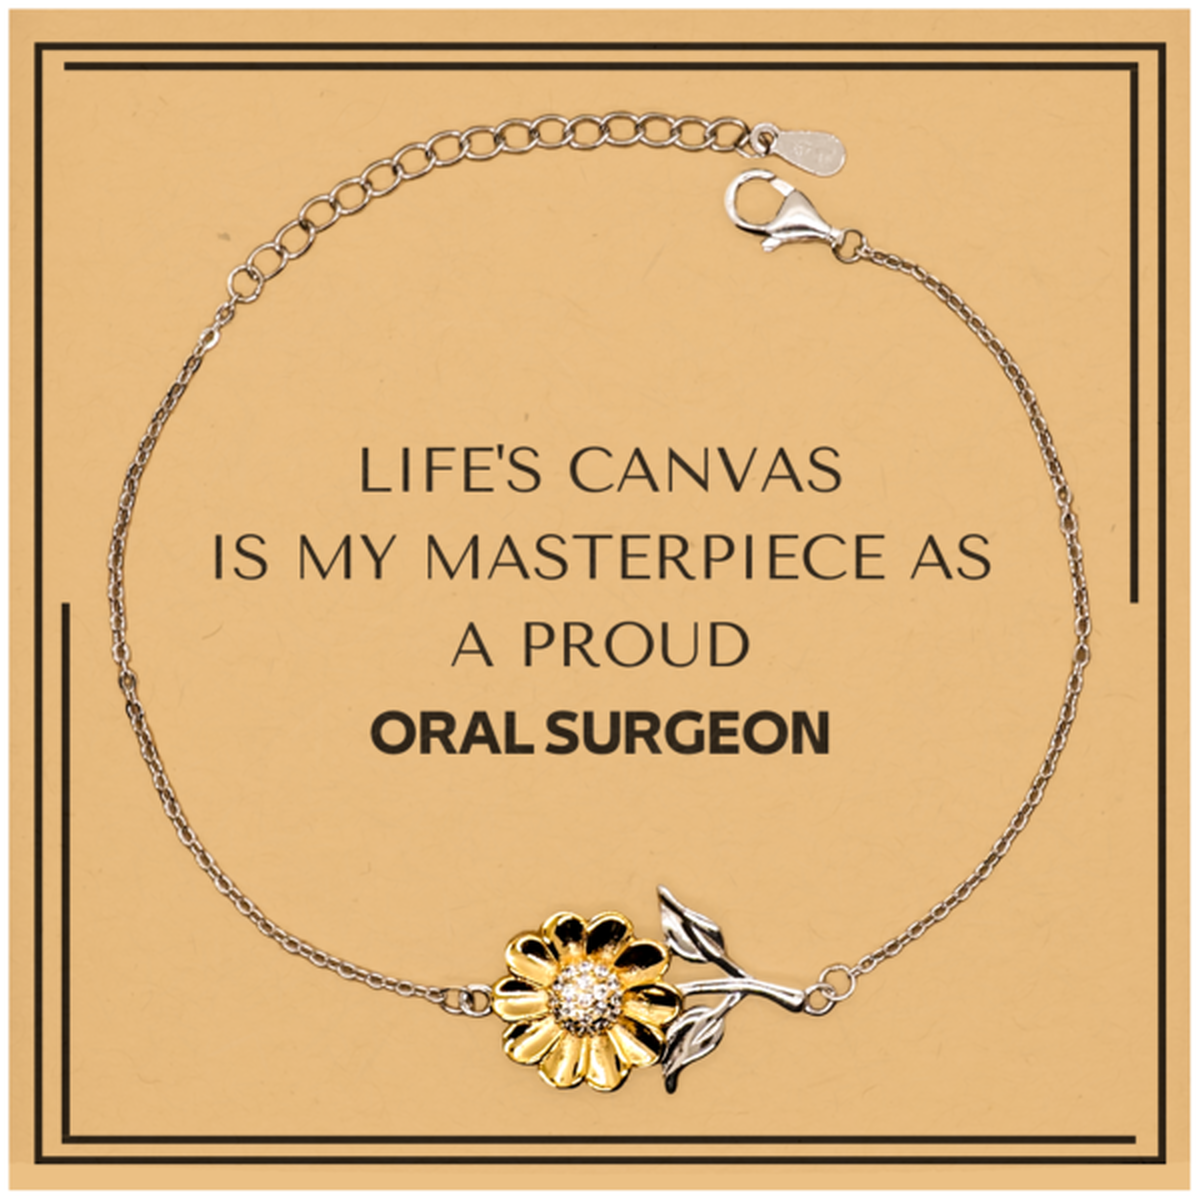 Proud Oral Surgeon Gifts, Life's canvas is my masterpiece, Epic Birthday Christmas Unique Sunflower Bracelet For Oral Surgeon, Coworkers, Men, Women, Friends